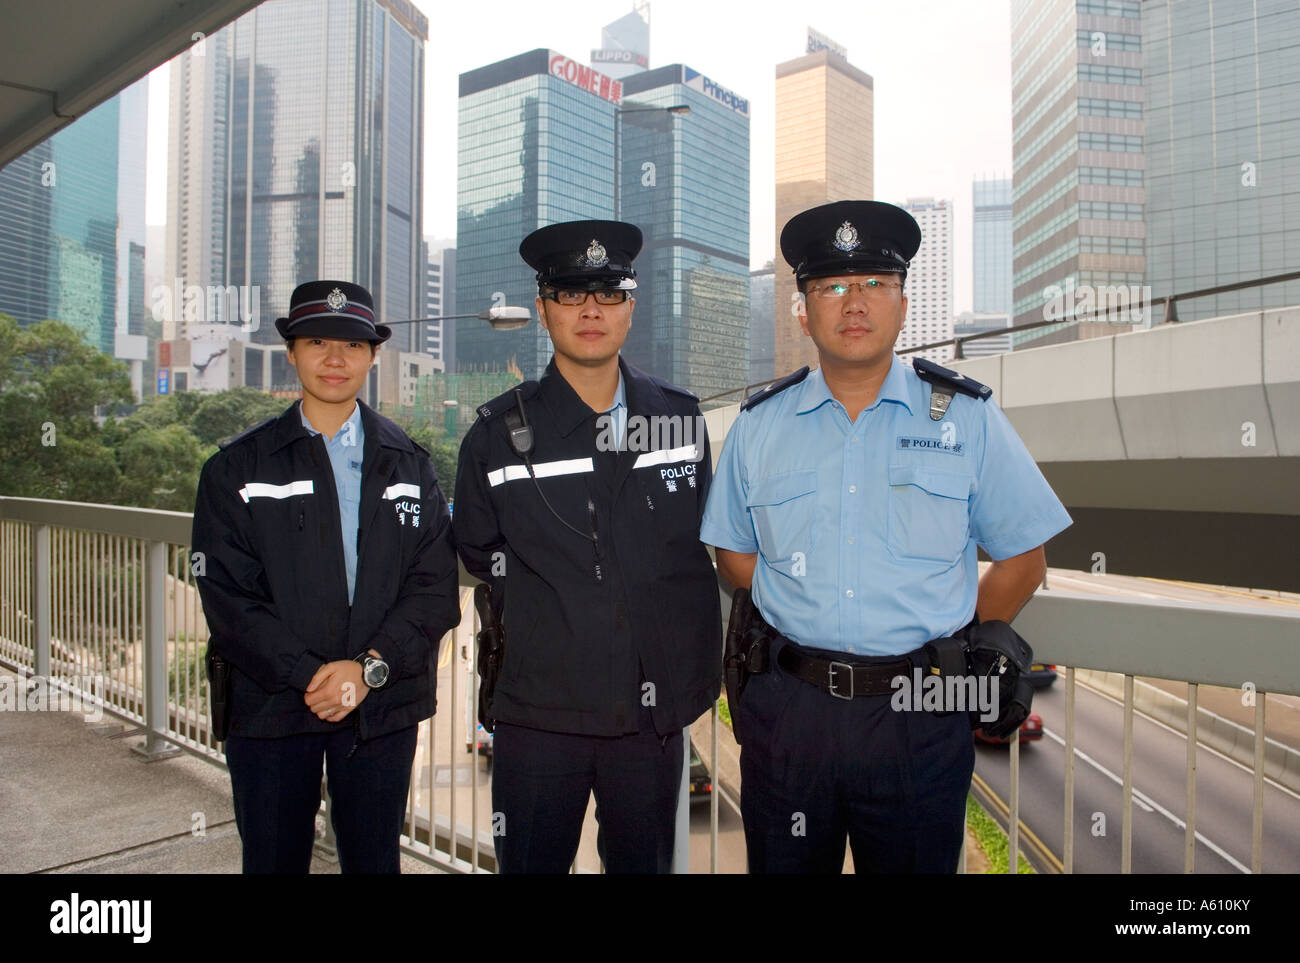 Hong Kong Island, China. Uniform police pose for photograph near Police Headquarters on Harcourt Rd. Admiralty District backdrop Stock Photo